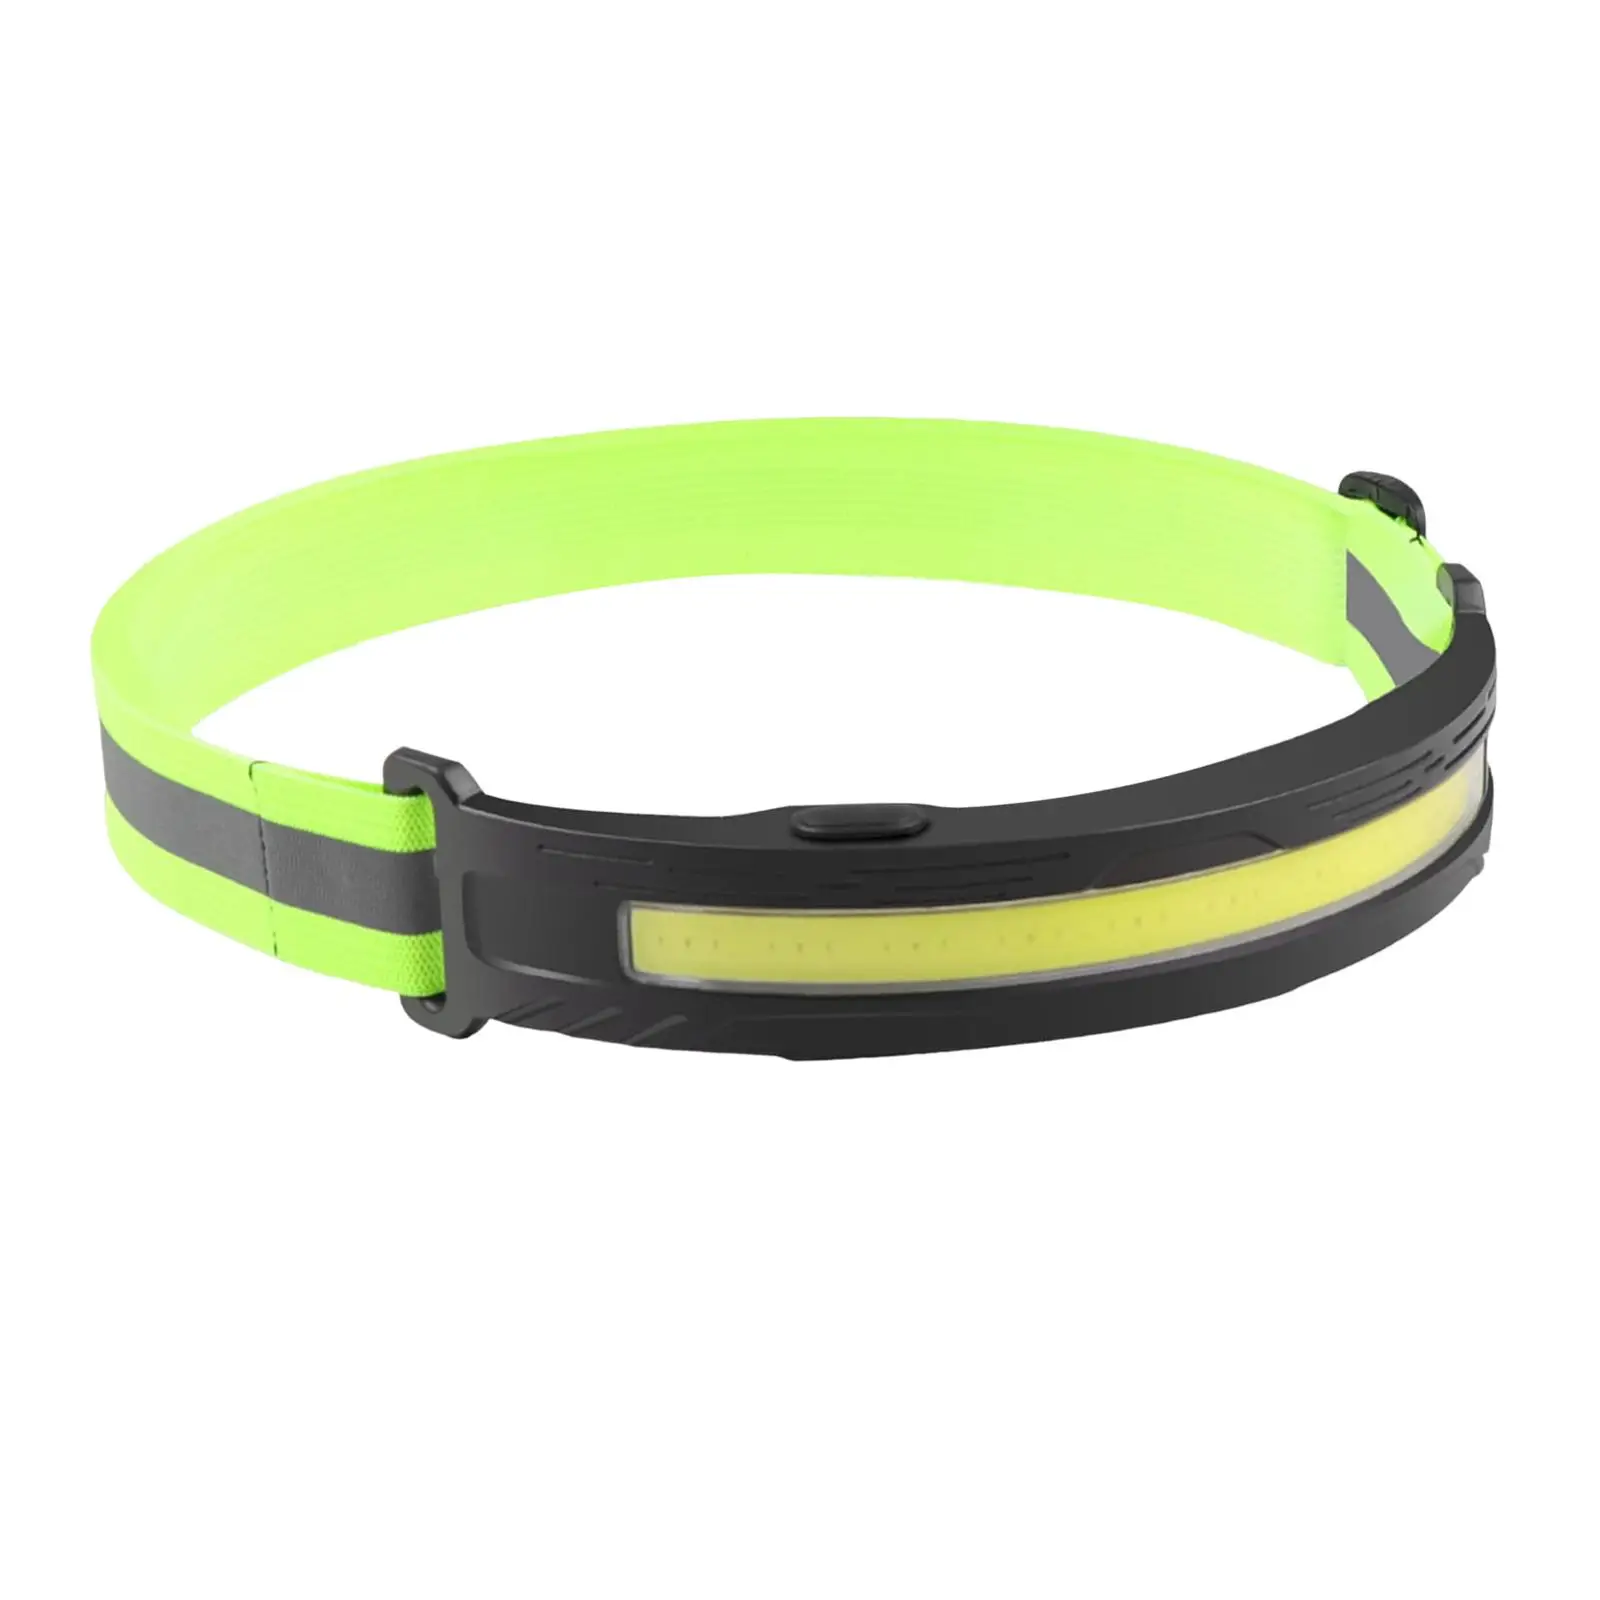 COB Headlamp Waterproof USB Rechargeable Bright Elastic Head Band Light Floodlight Headlights Torch for Hiking Camping Fishing